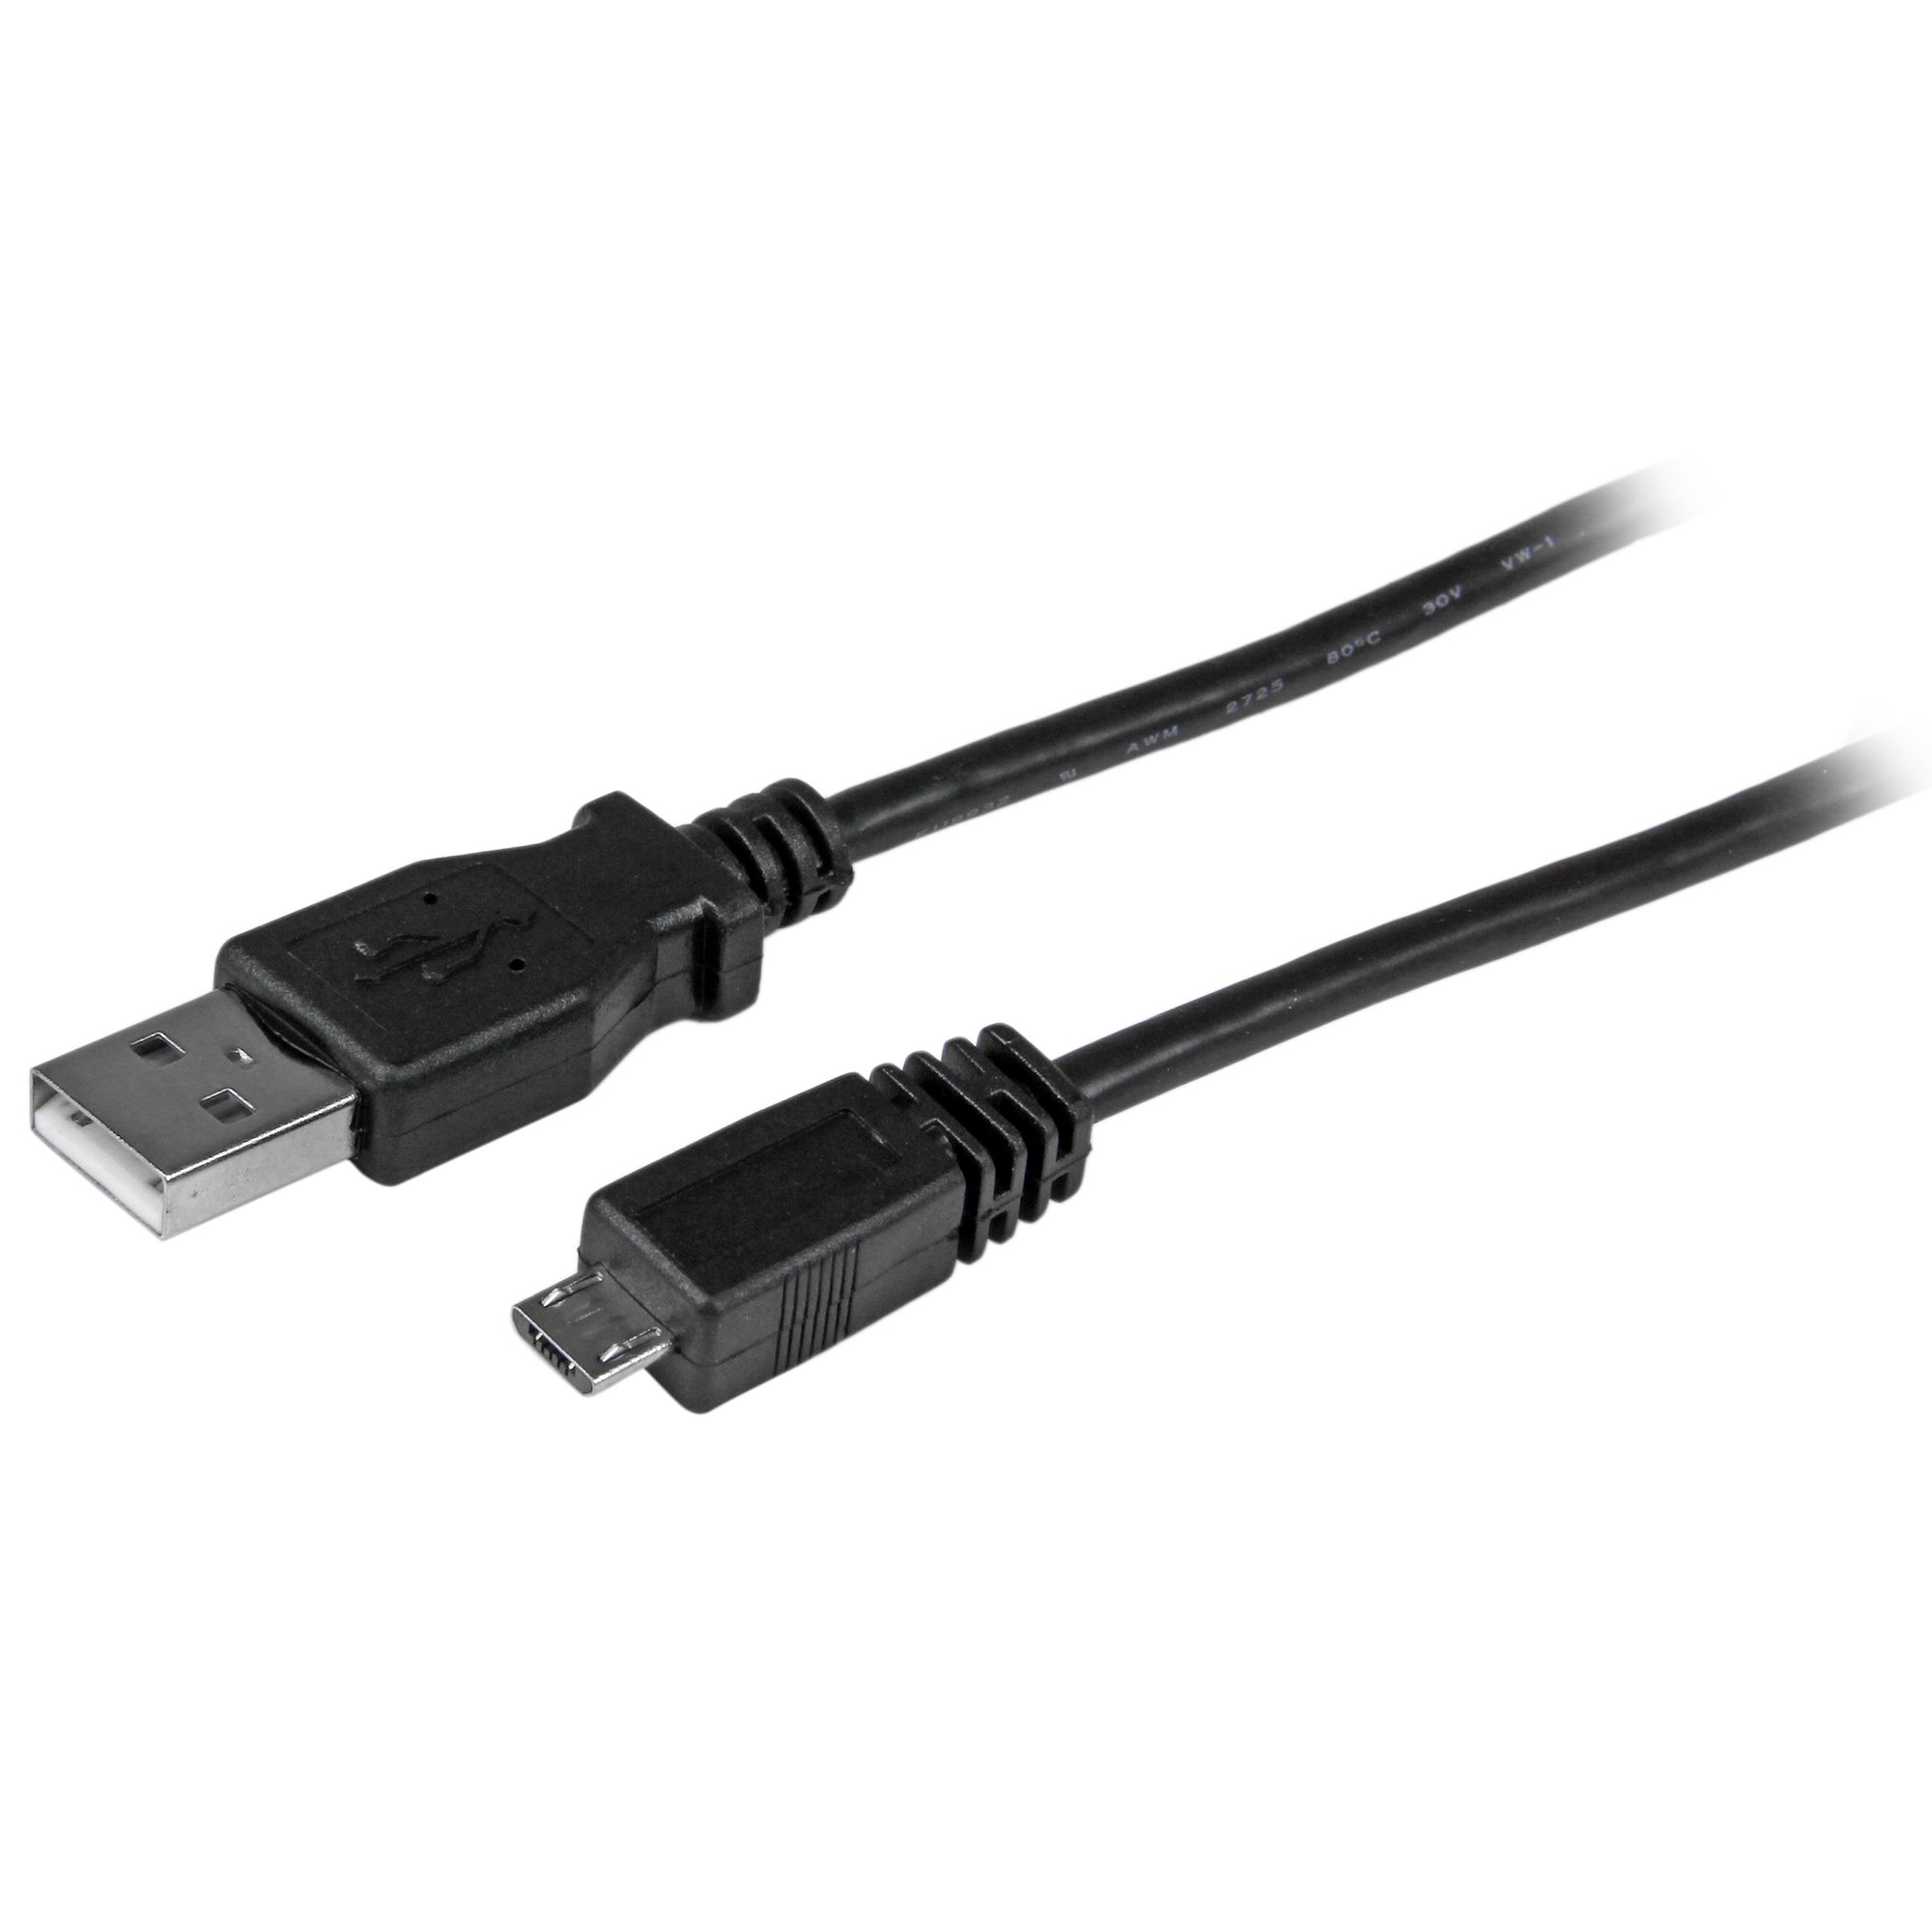 【UUSBHAUB3】3FT MICRO USB CABLE - A TO MICRO